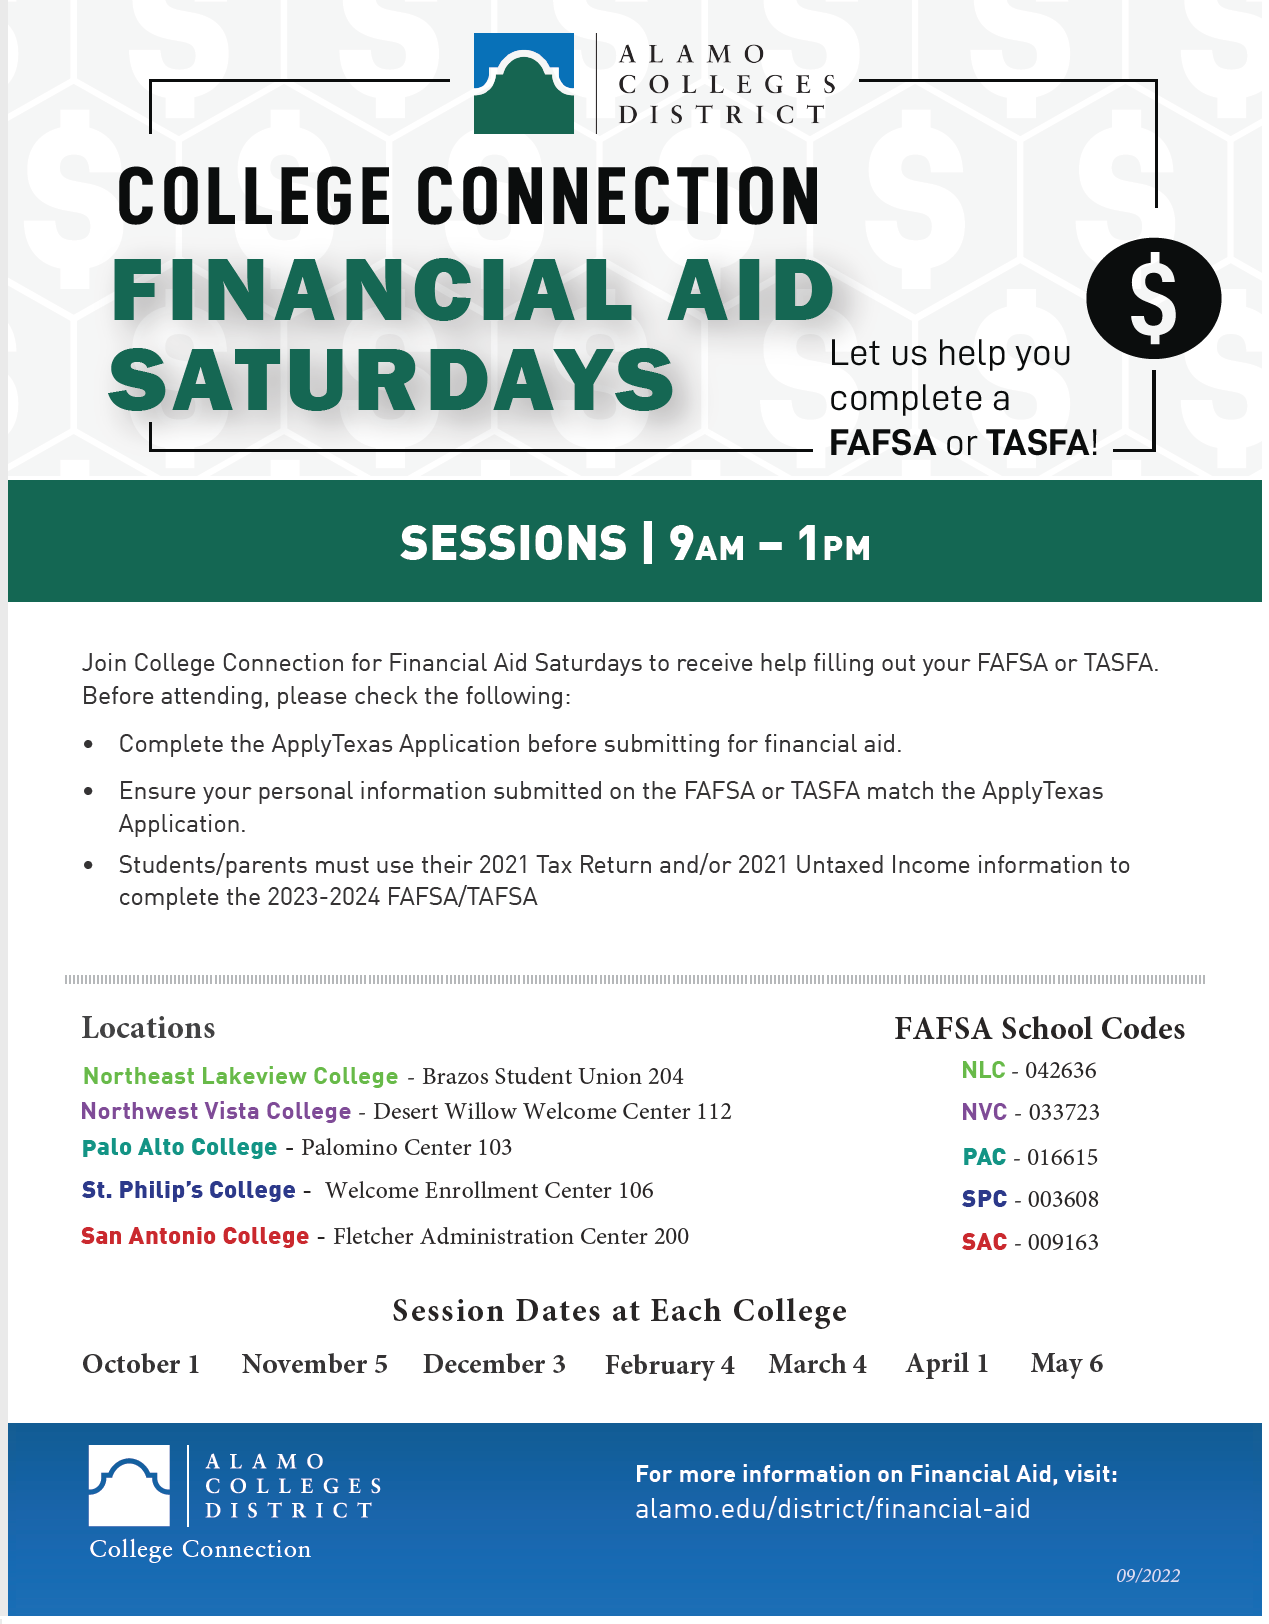 College Connection Financial Aid Saturdays Flyer 2022-2023 Revised.png